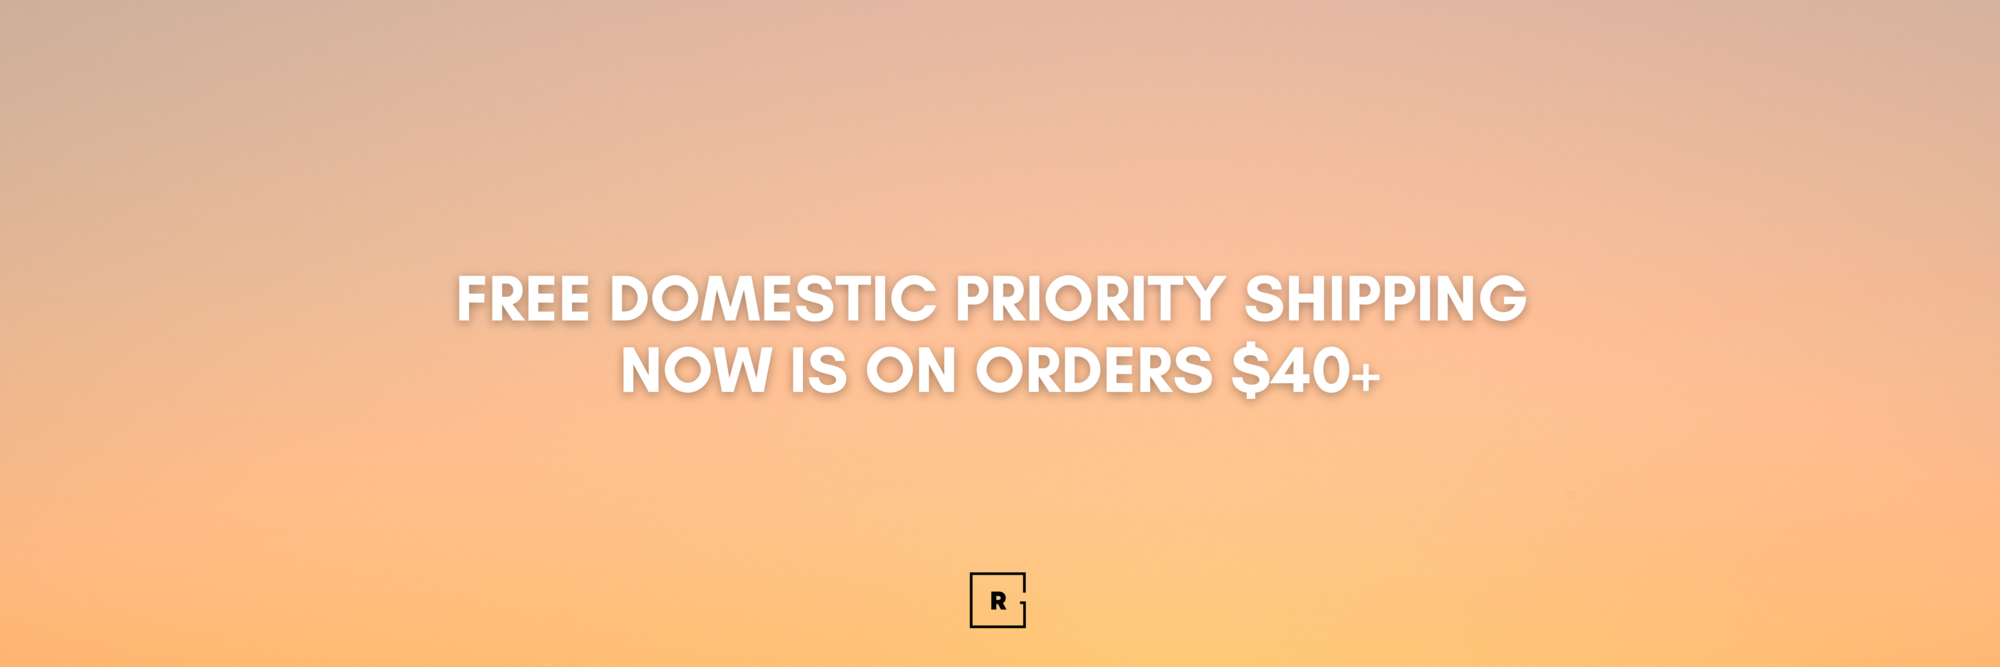 free domestic shipping on orders $40+